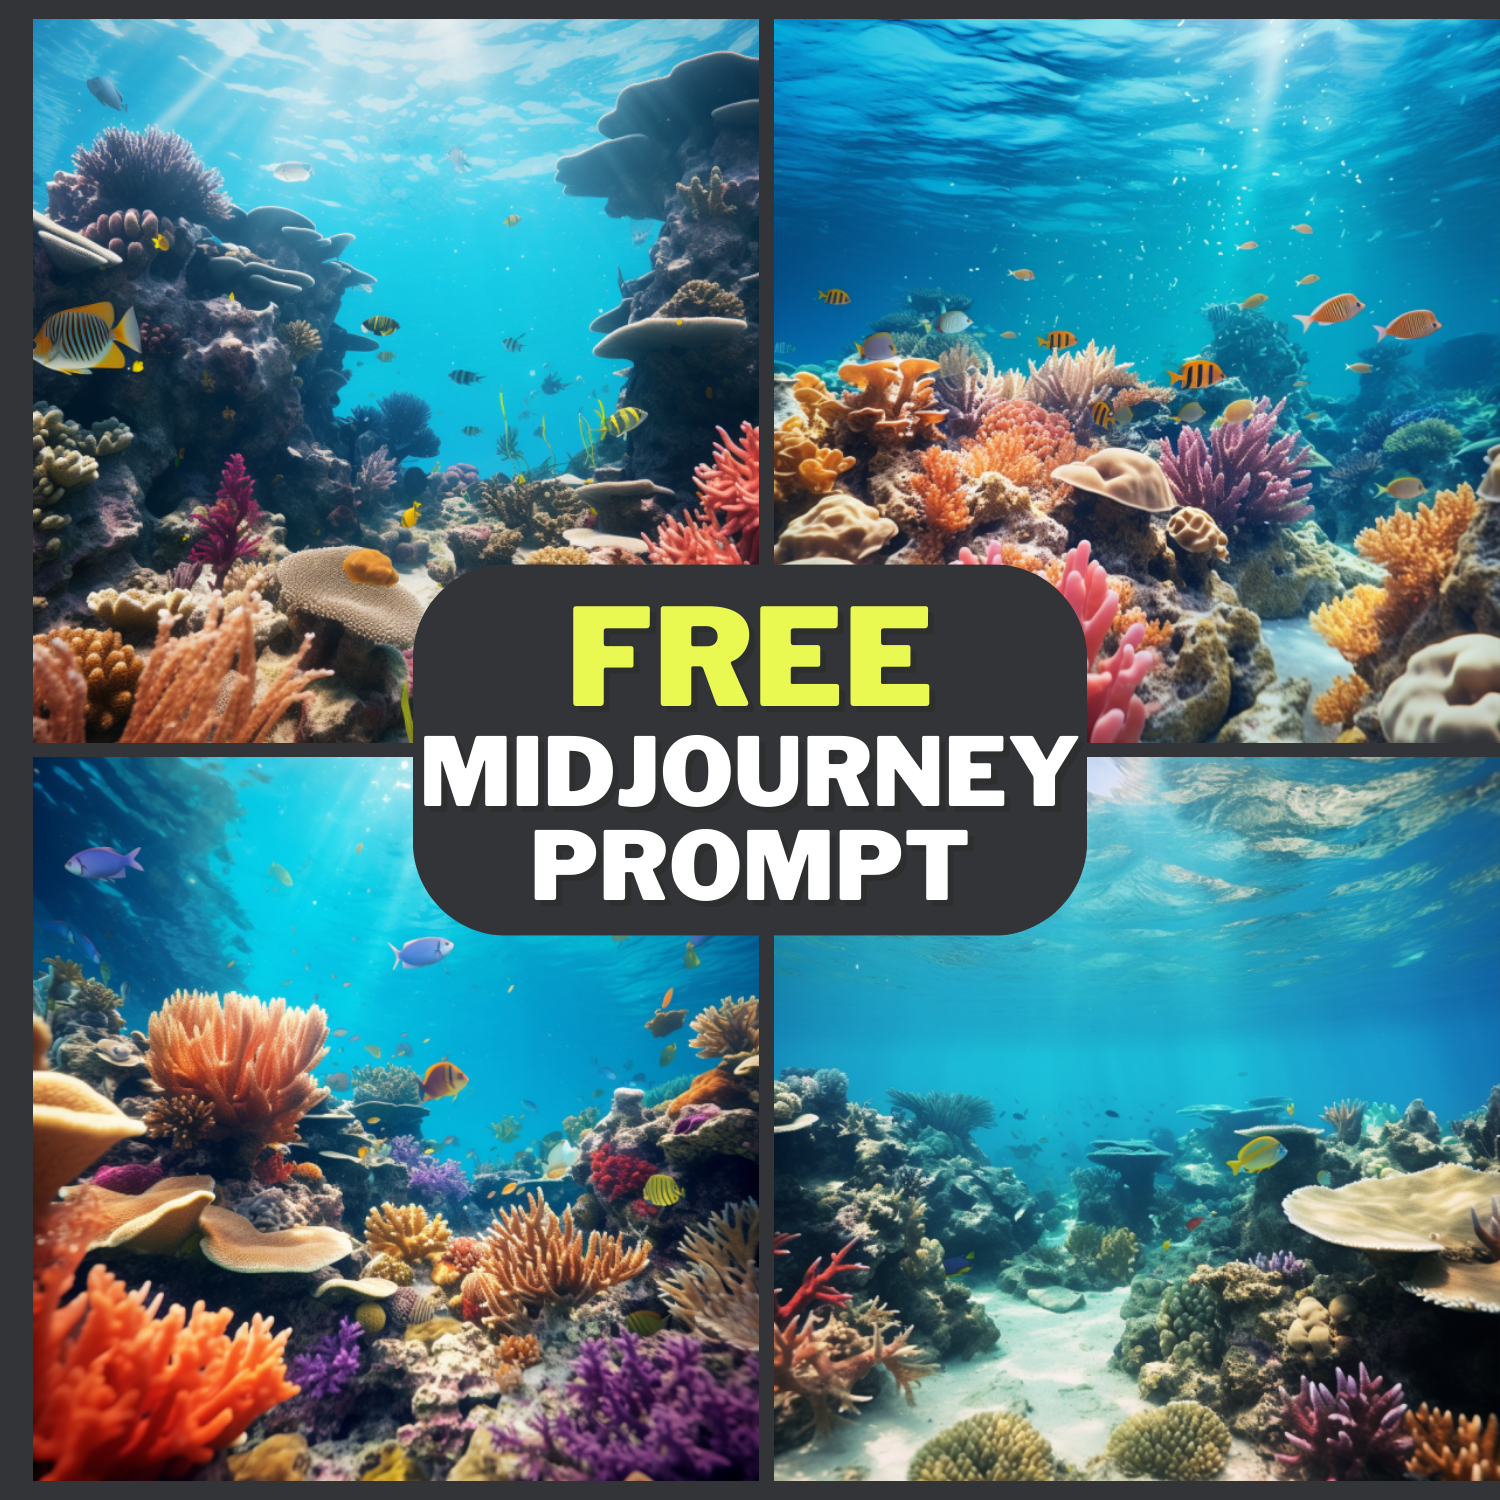 Underwater Pov Of Ocean Bed With Corals Free Midjourney Prompt 1